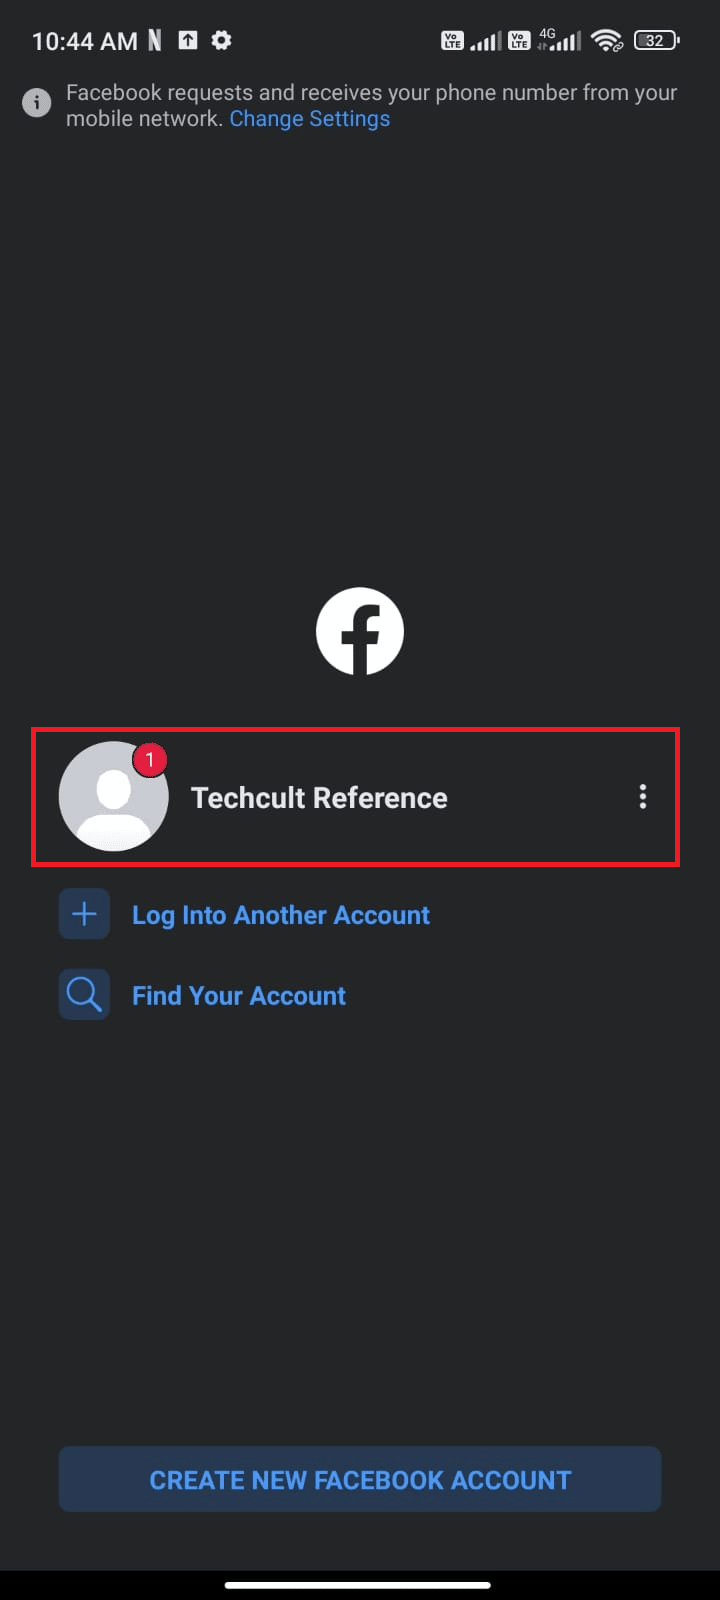 Wait for a few seconds and tap on your Facebook account to log in again